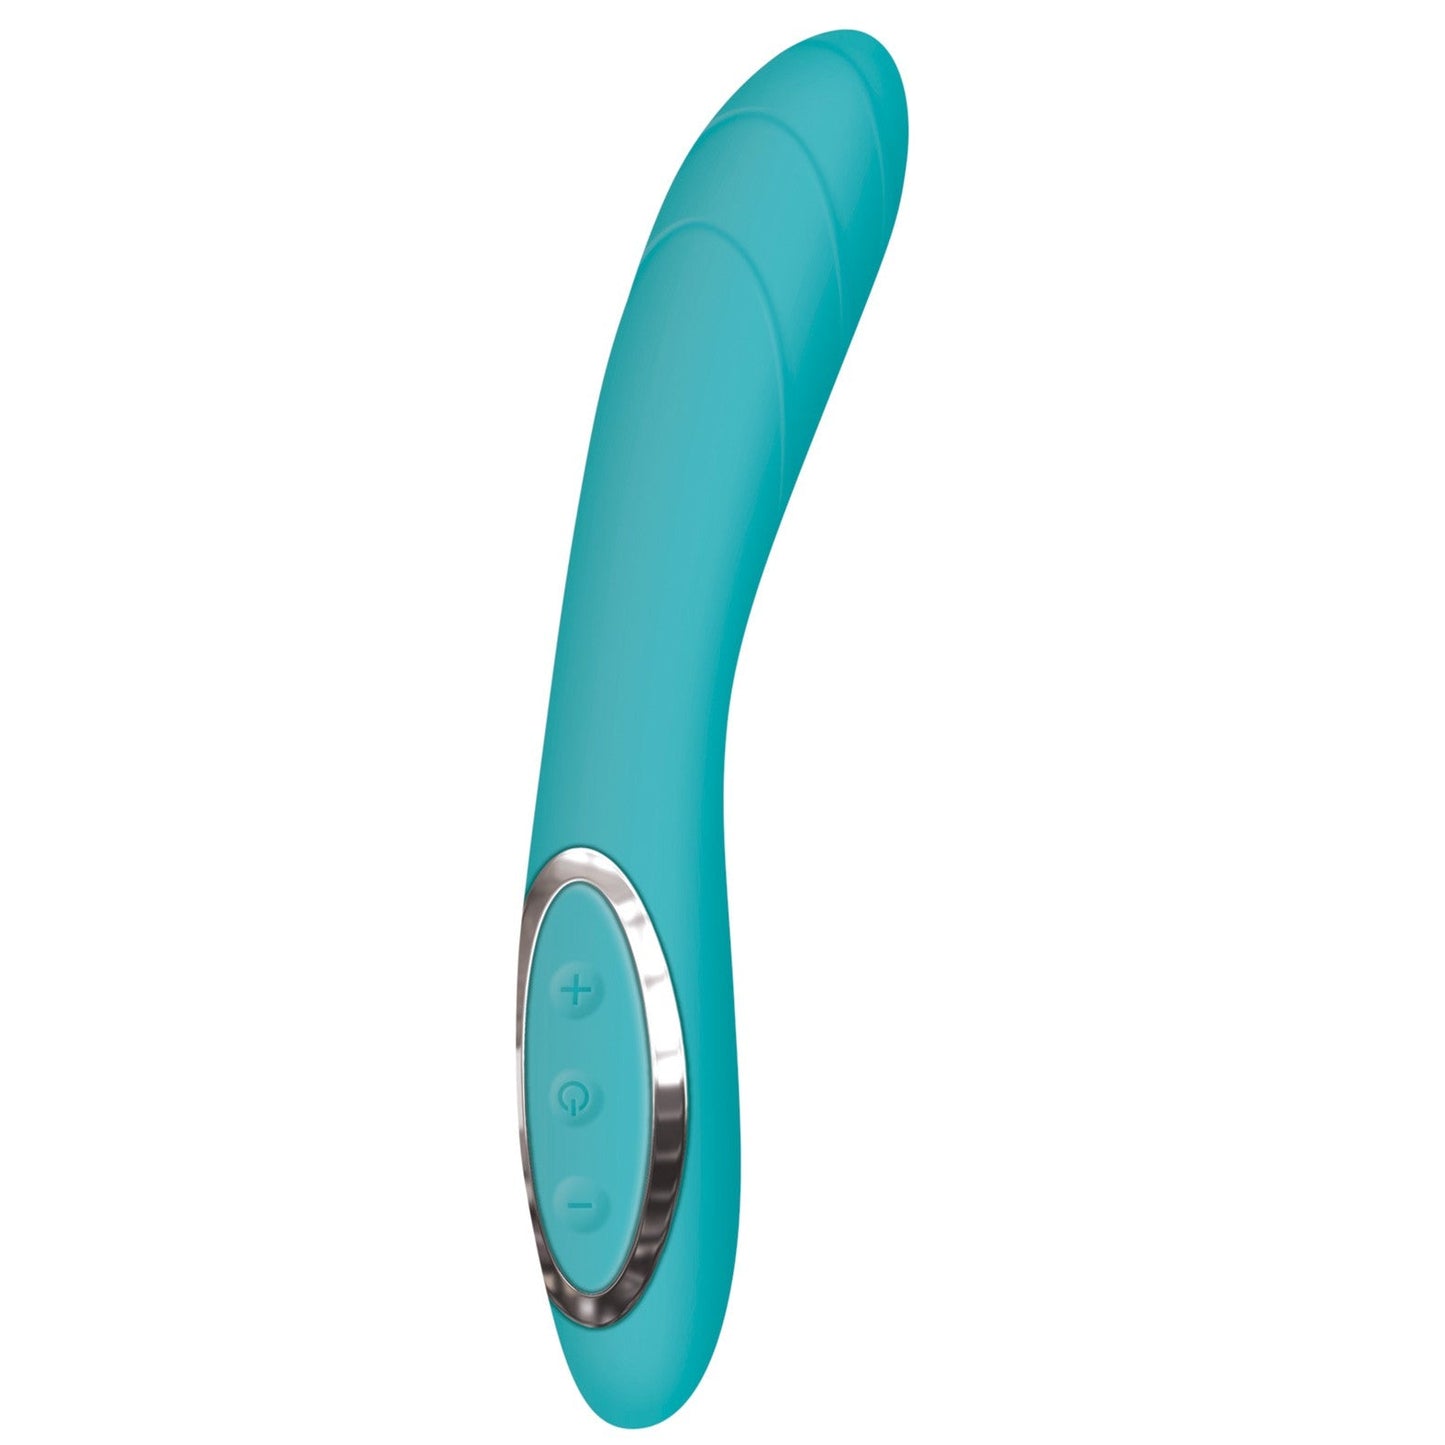 Adam & Eve G Gasm Curve Rechargeable Vibrator G-bliss O-maker - Teal